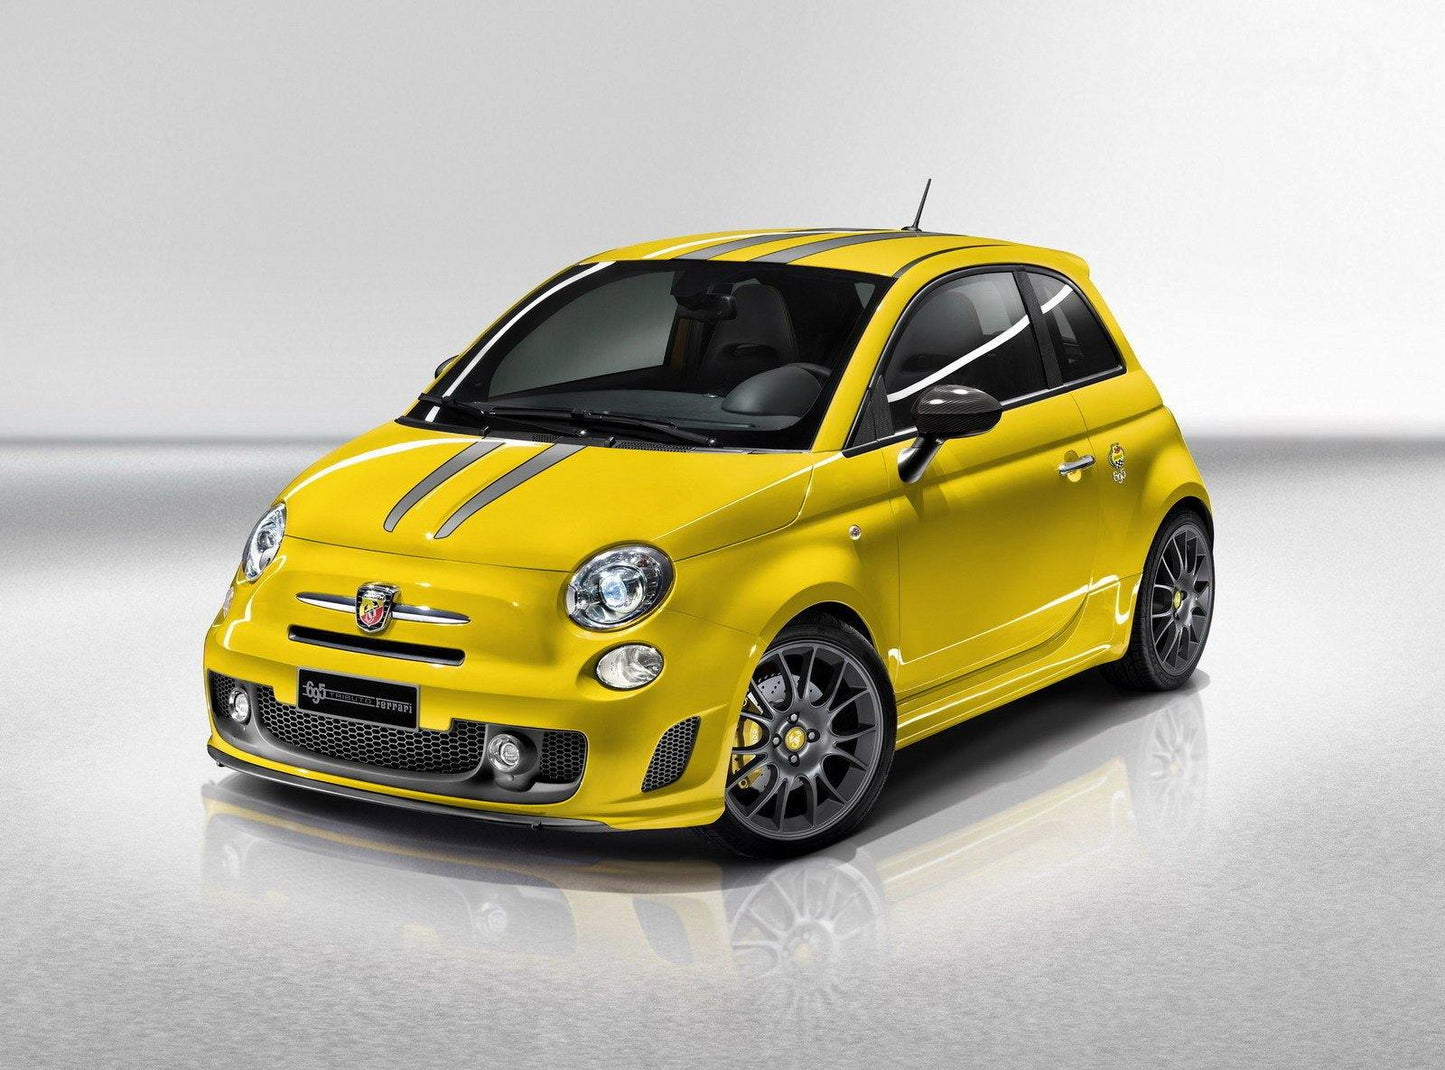 Abarth 695 Decals Bonnet/Hood and Roof Stripes - Abarth Tuning